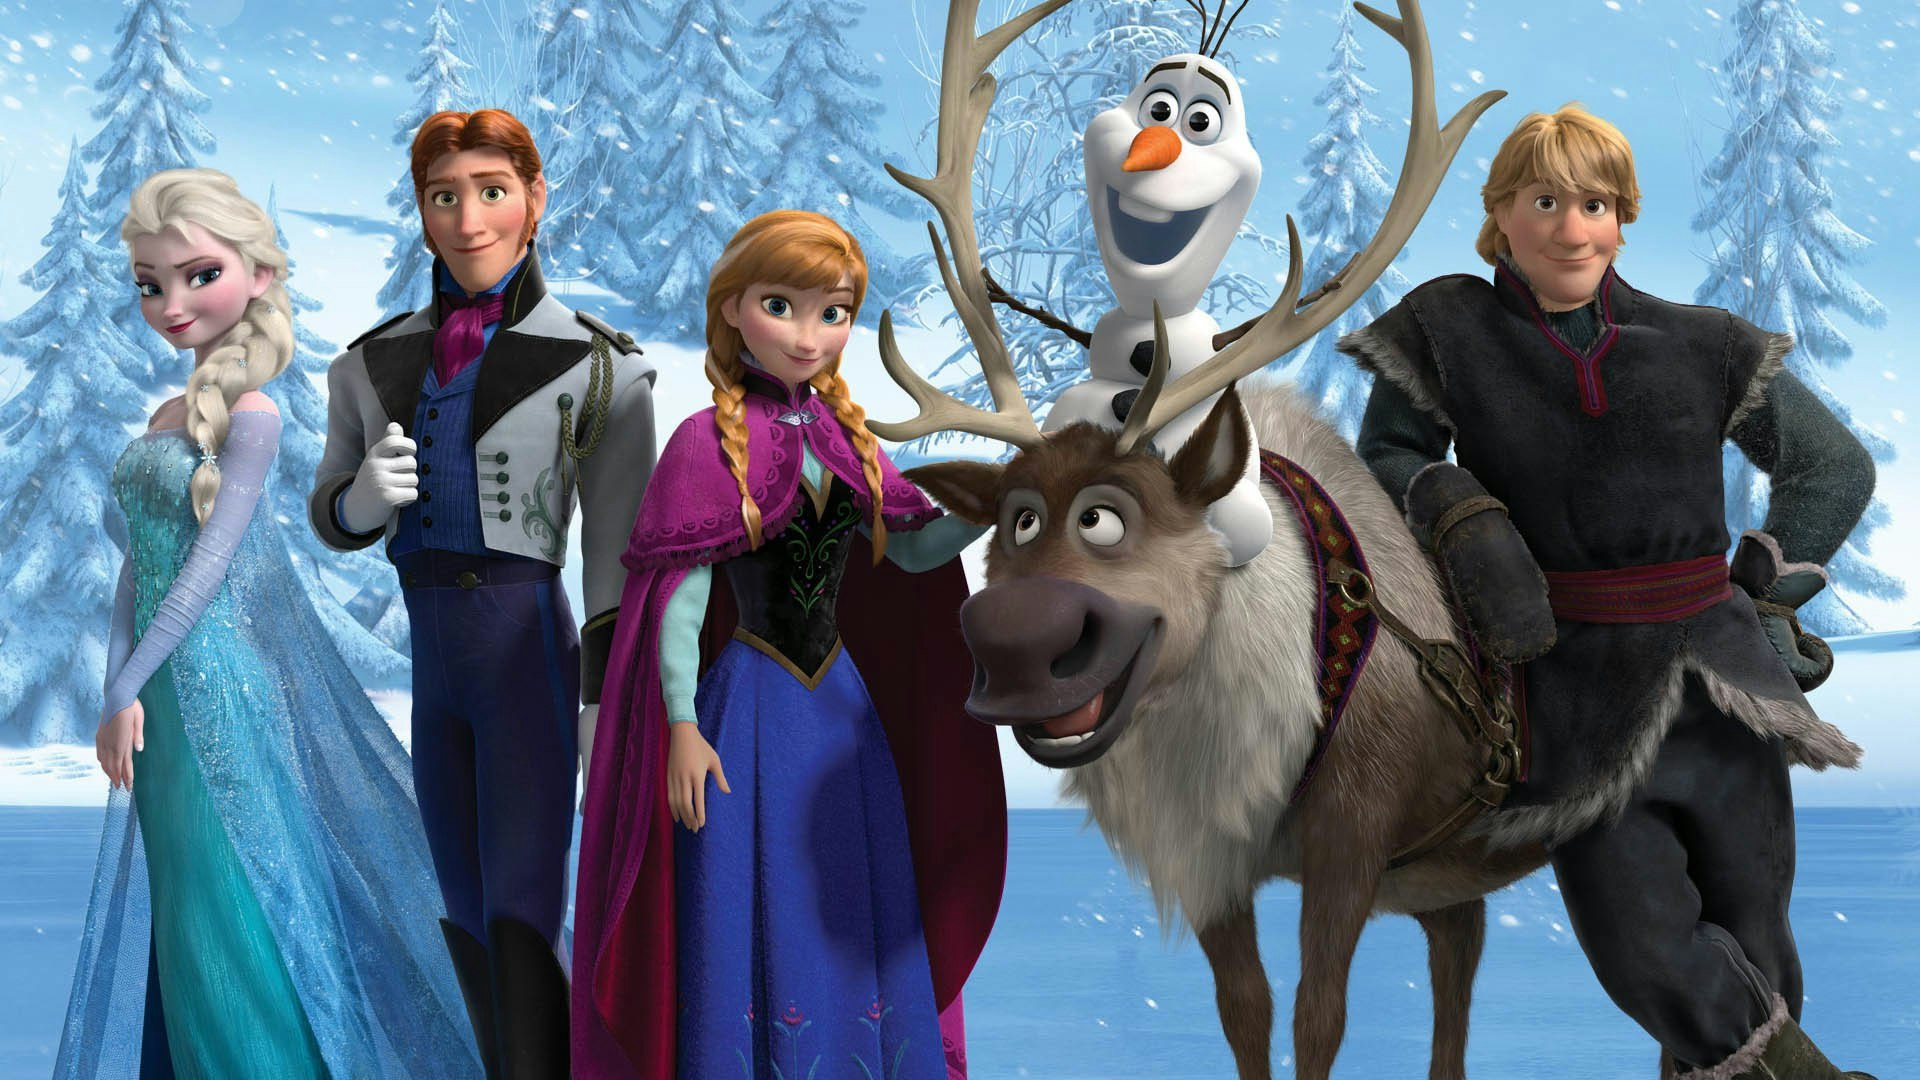 The Frozen Directors' Character Guide | Movies | %%channel_name%%